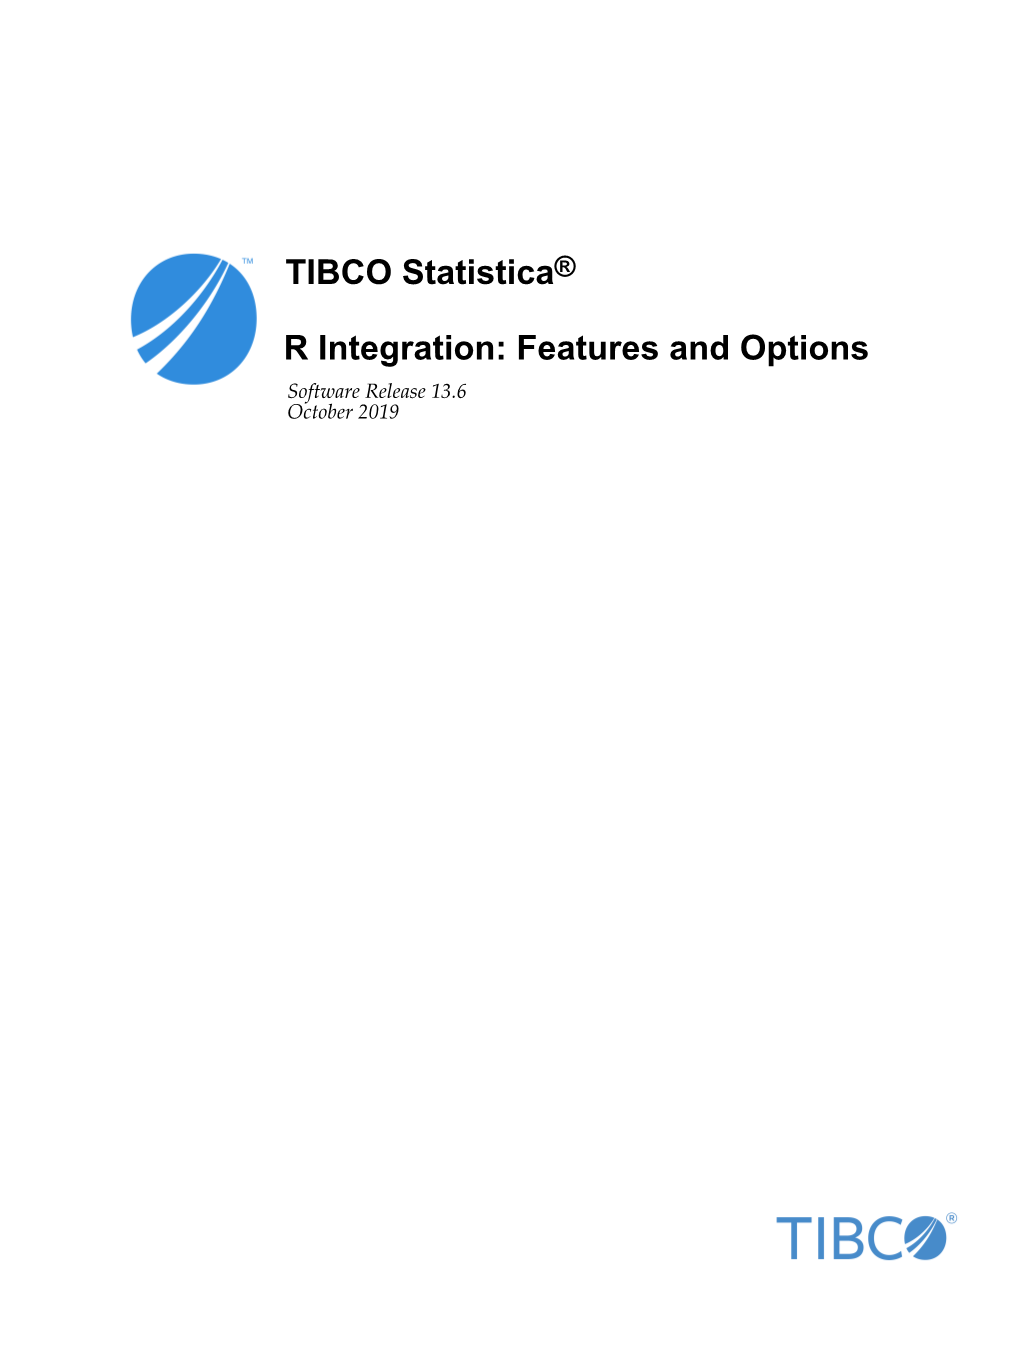 TIBCO Statistica® R Integration: Features and Options 3